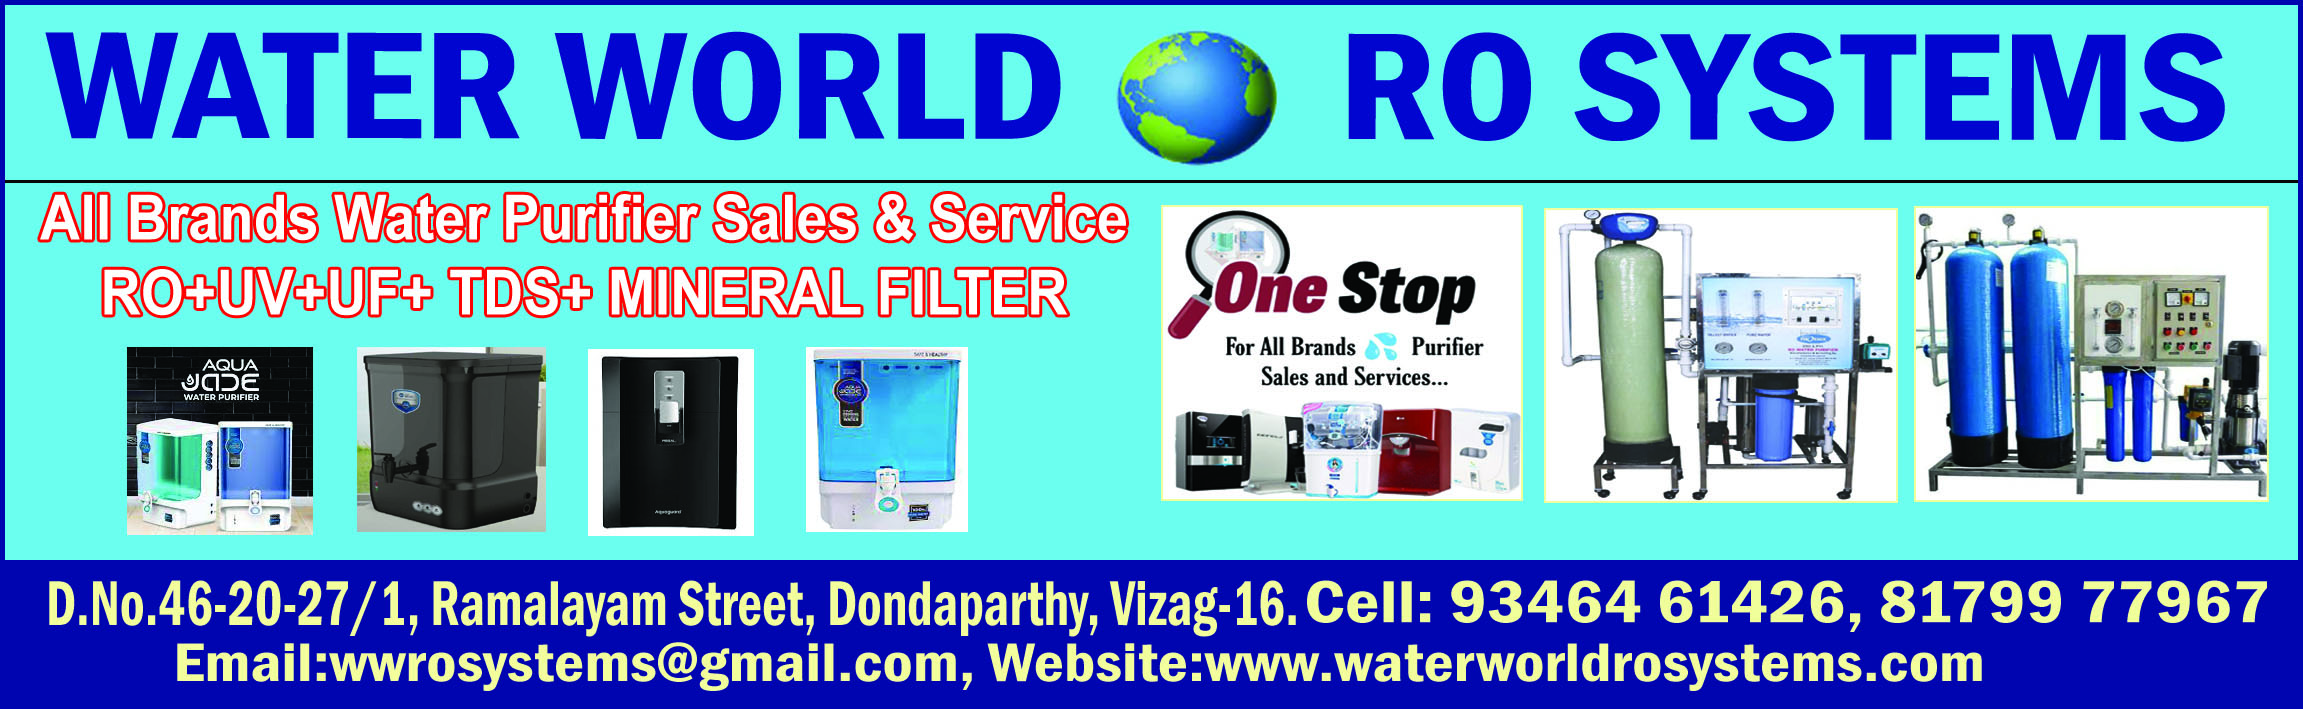 WATER WORLD RO SYSTEMS